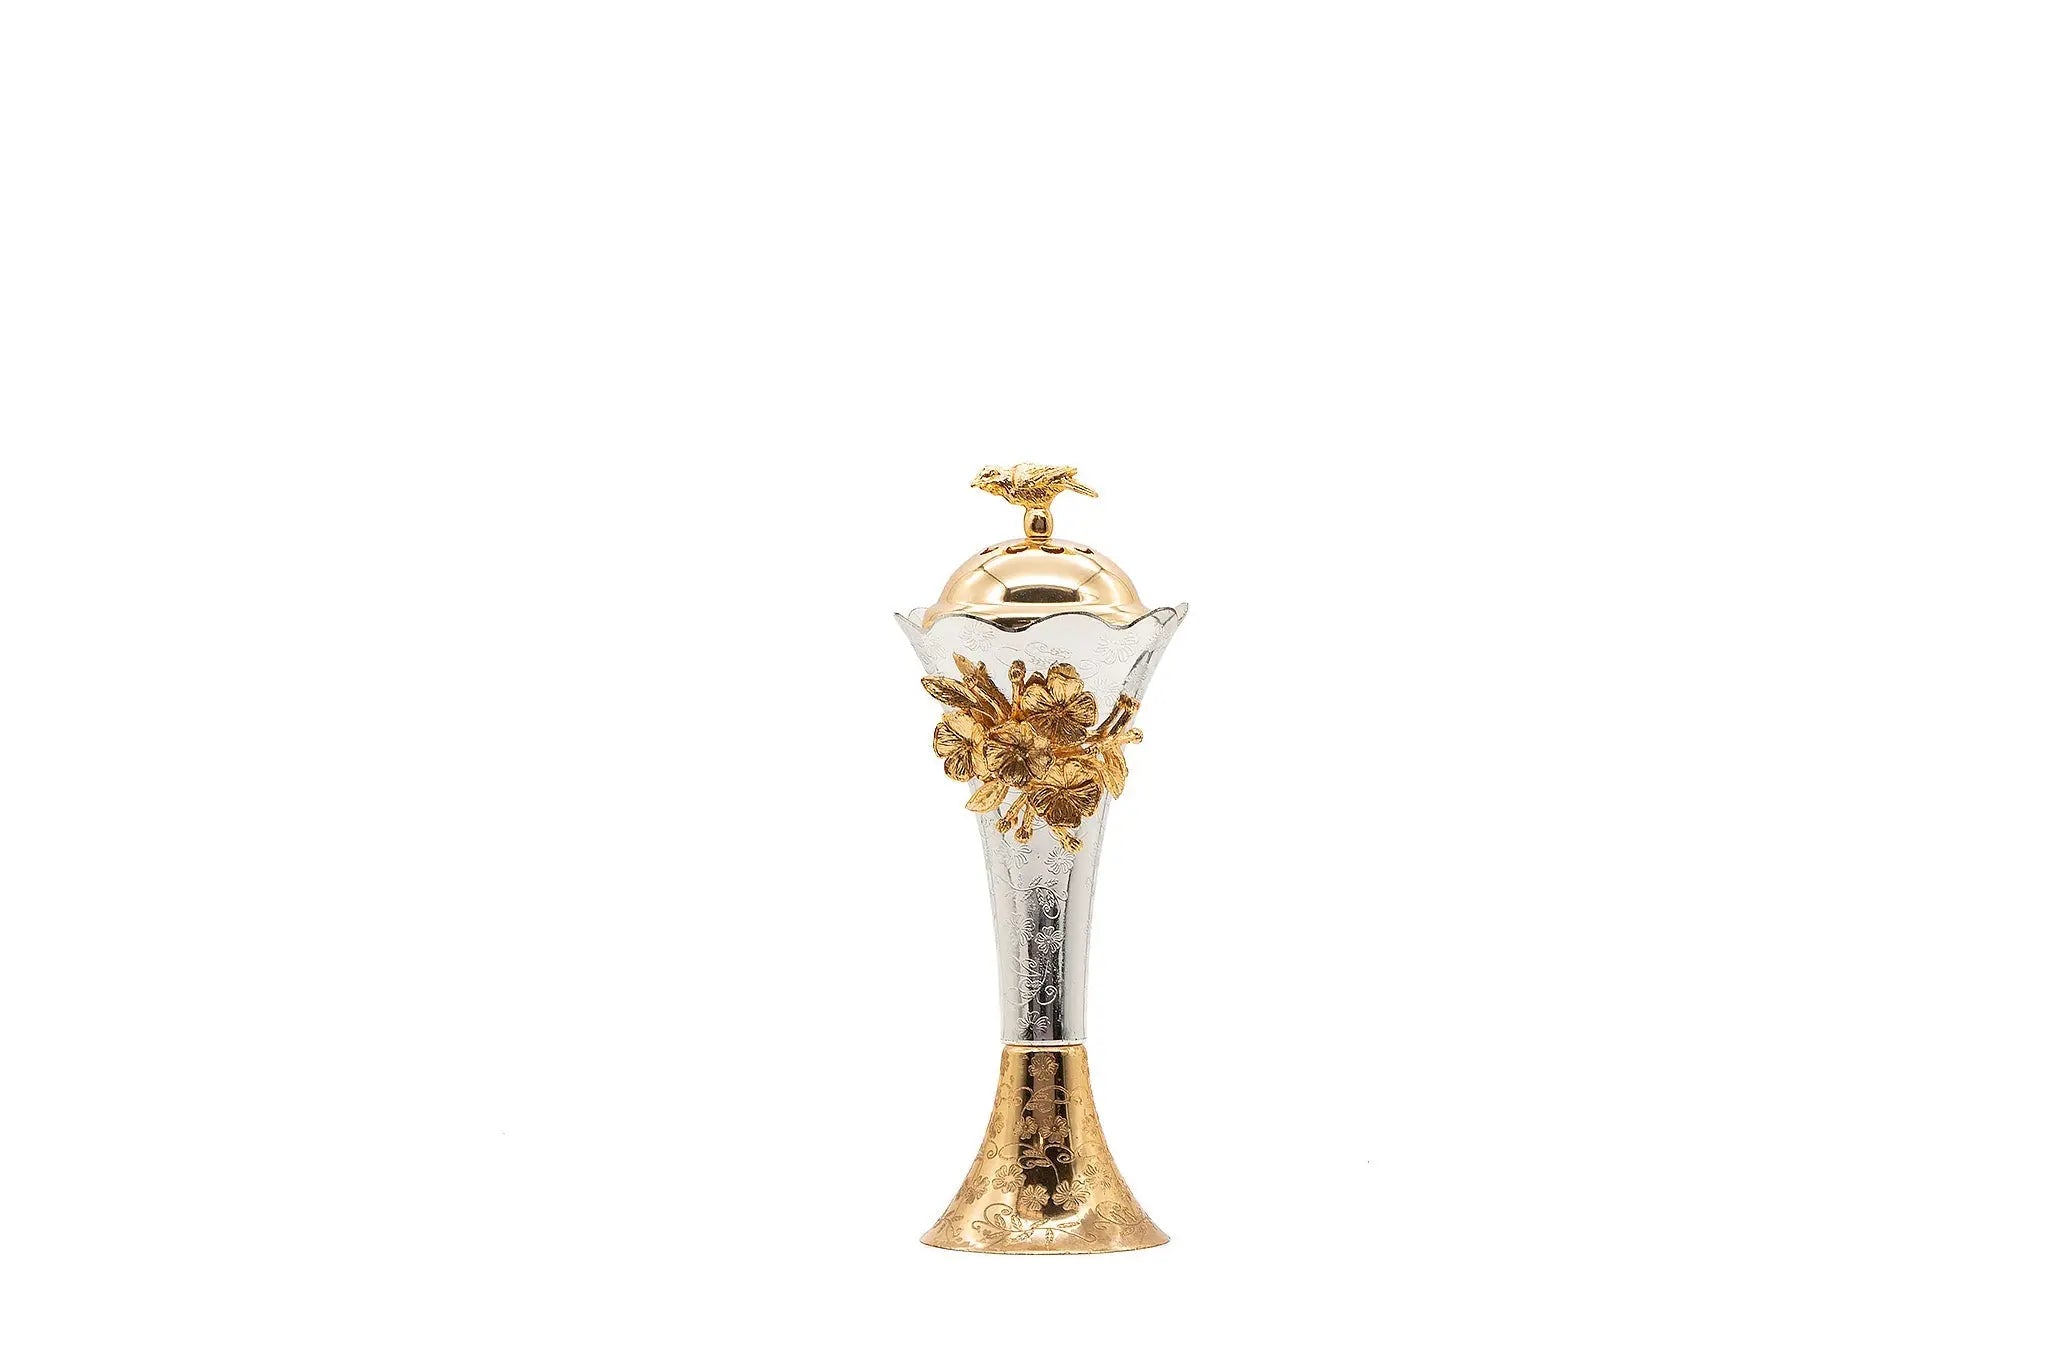 Flower Shaped Incense Burner With Floral Designs - Armani Gallery